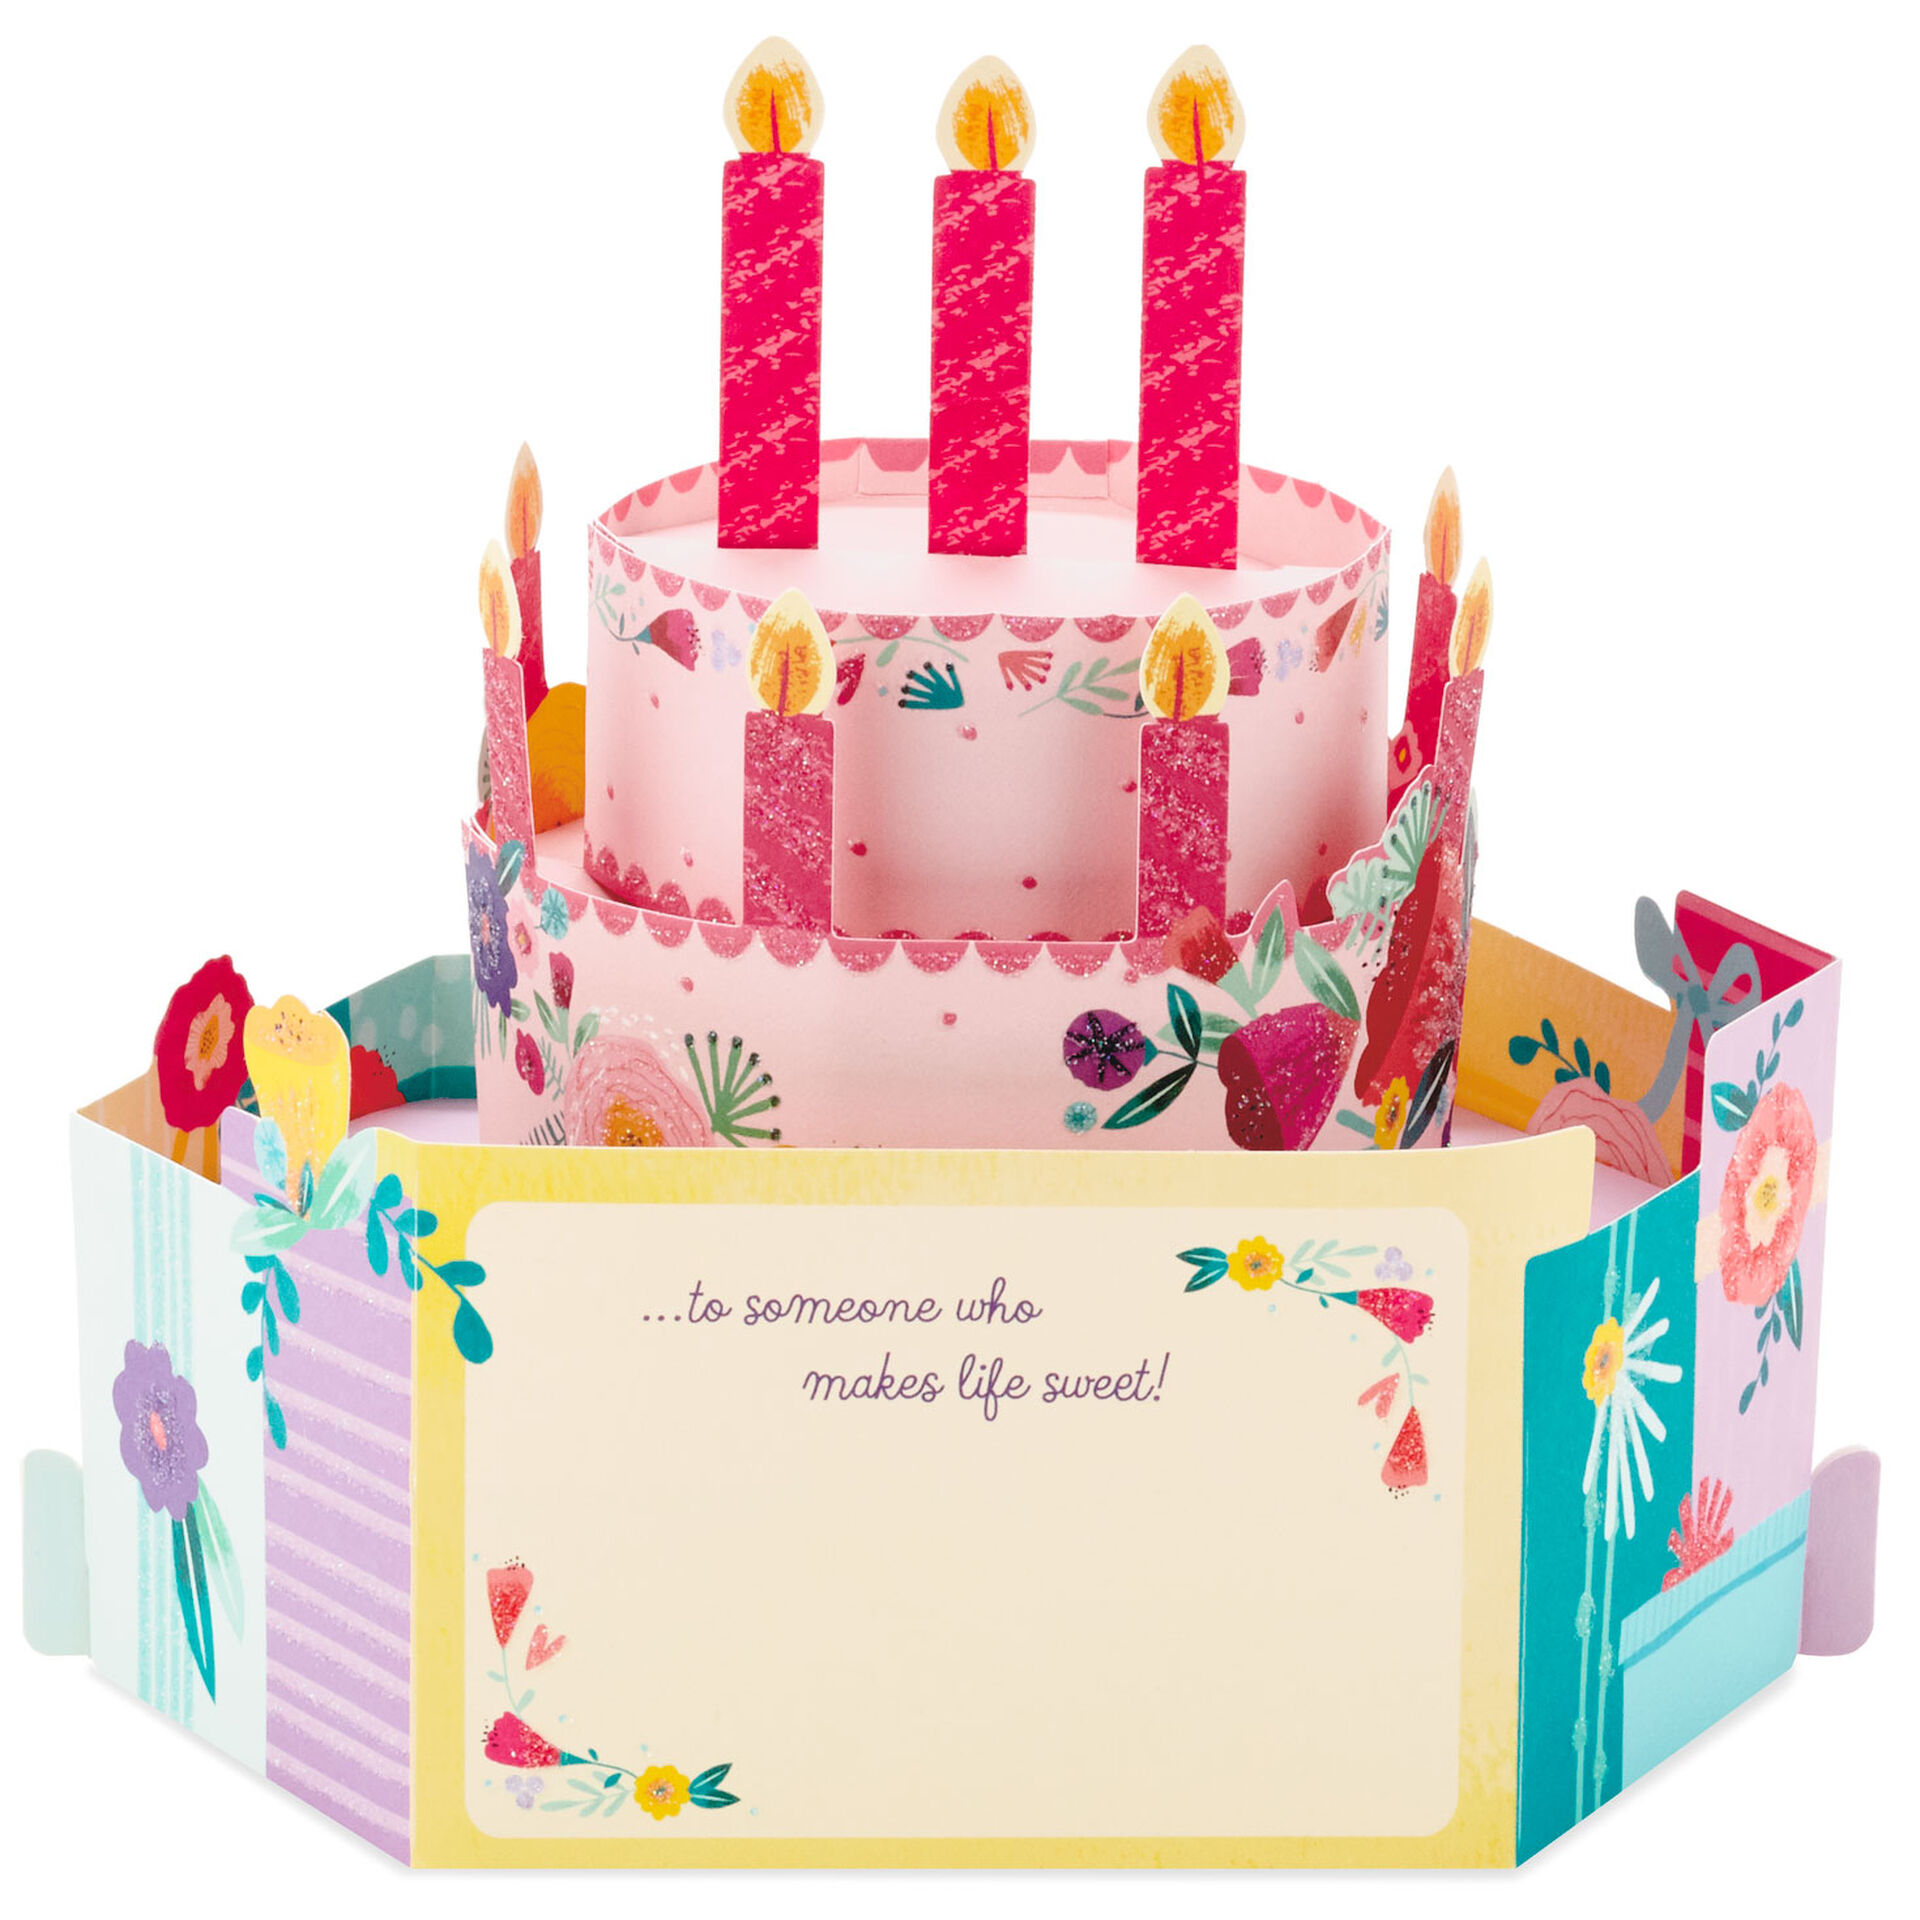 Cake-Flowers-&-Gifts-3D-PopUp-Birthday-Card-for-Her_799WDR1100_03